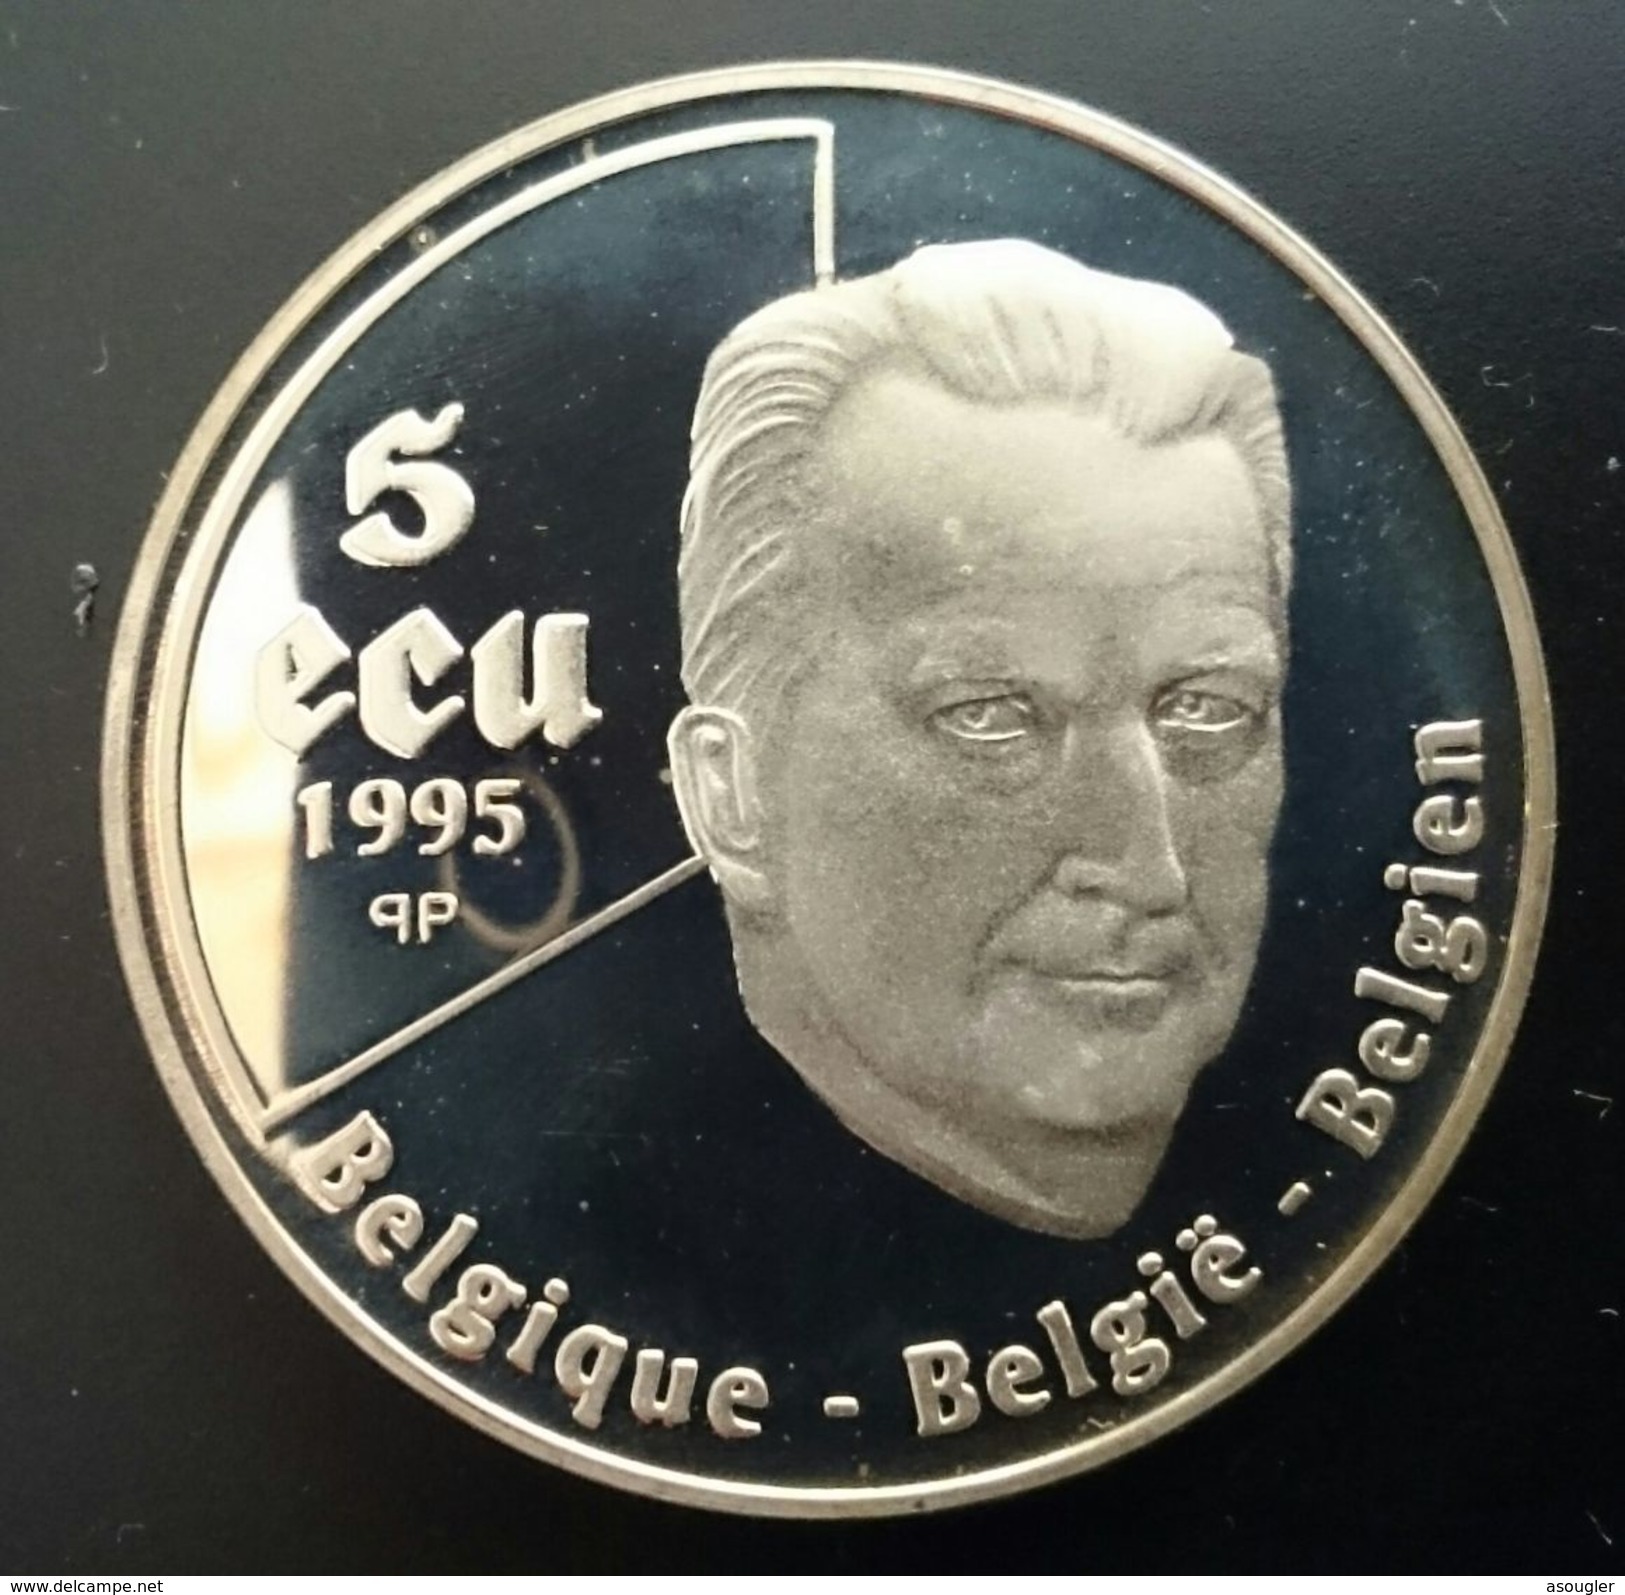 BELGIUM 5 ECU (EURO) 1995 SILVER PROOF "50th Anniversary - United Nations 1945-1995" Free Shipping Via Registered Air - Ecus (or)